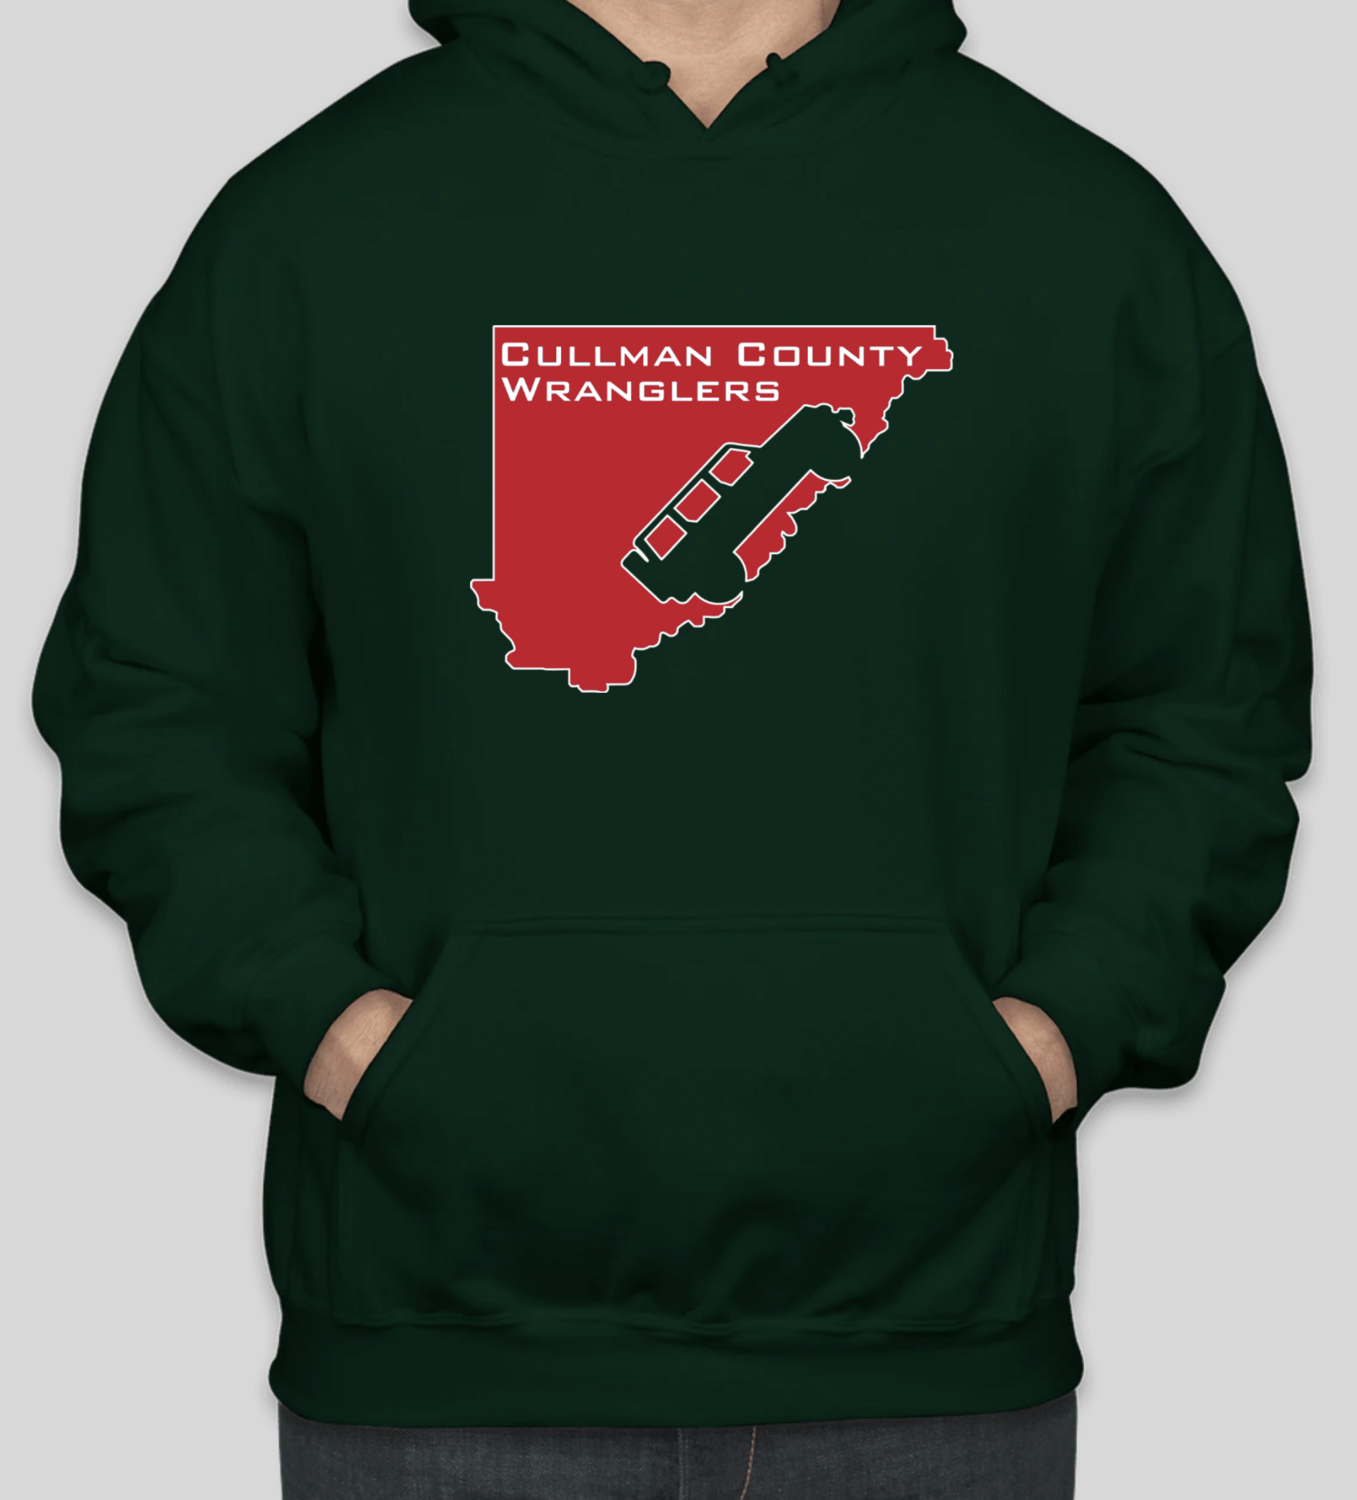 Cullman County Wranglers Hooded Sweatshirt - Red & Forest Green